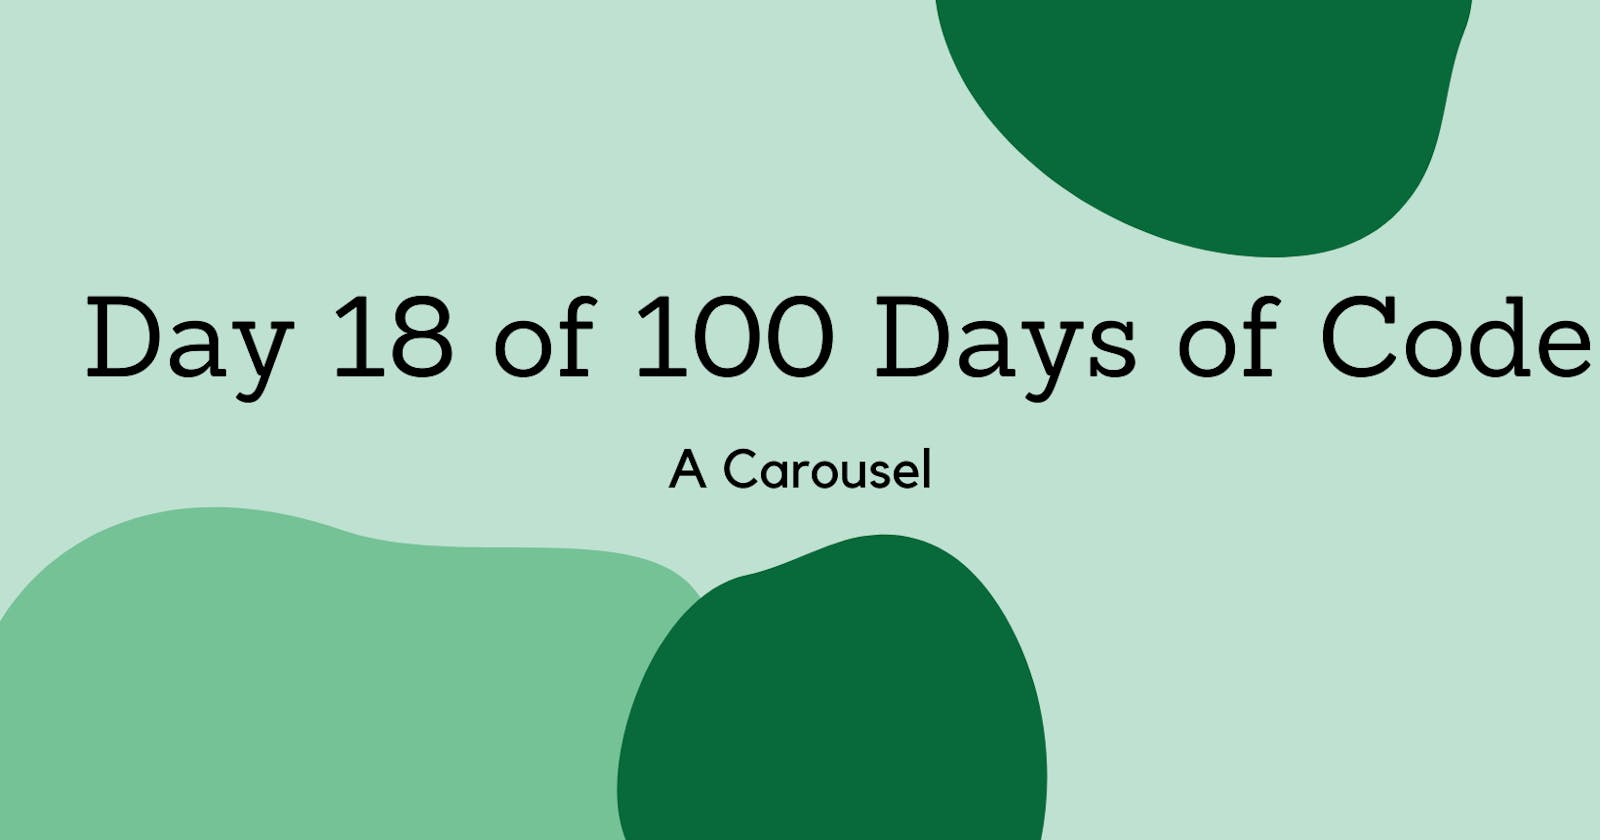 Day 18 of 100 Days of Code